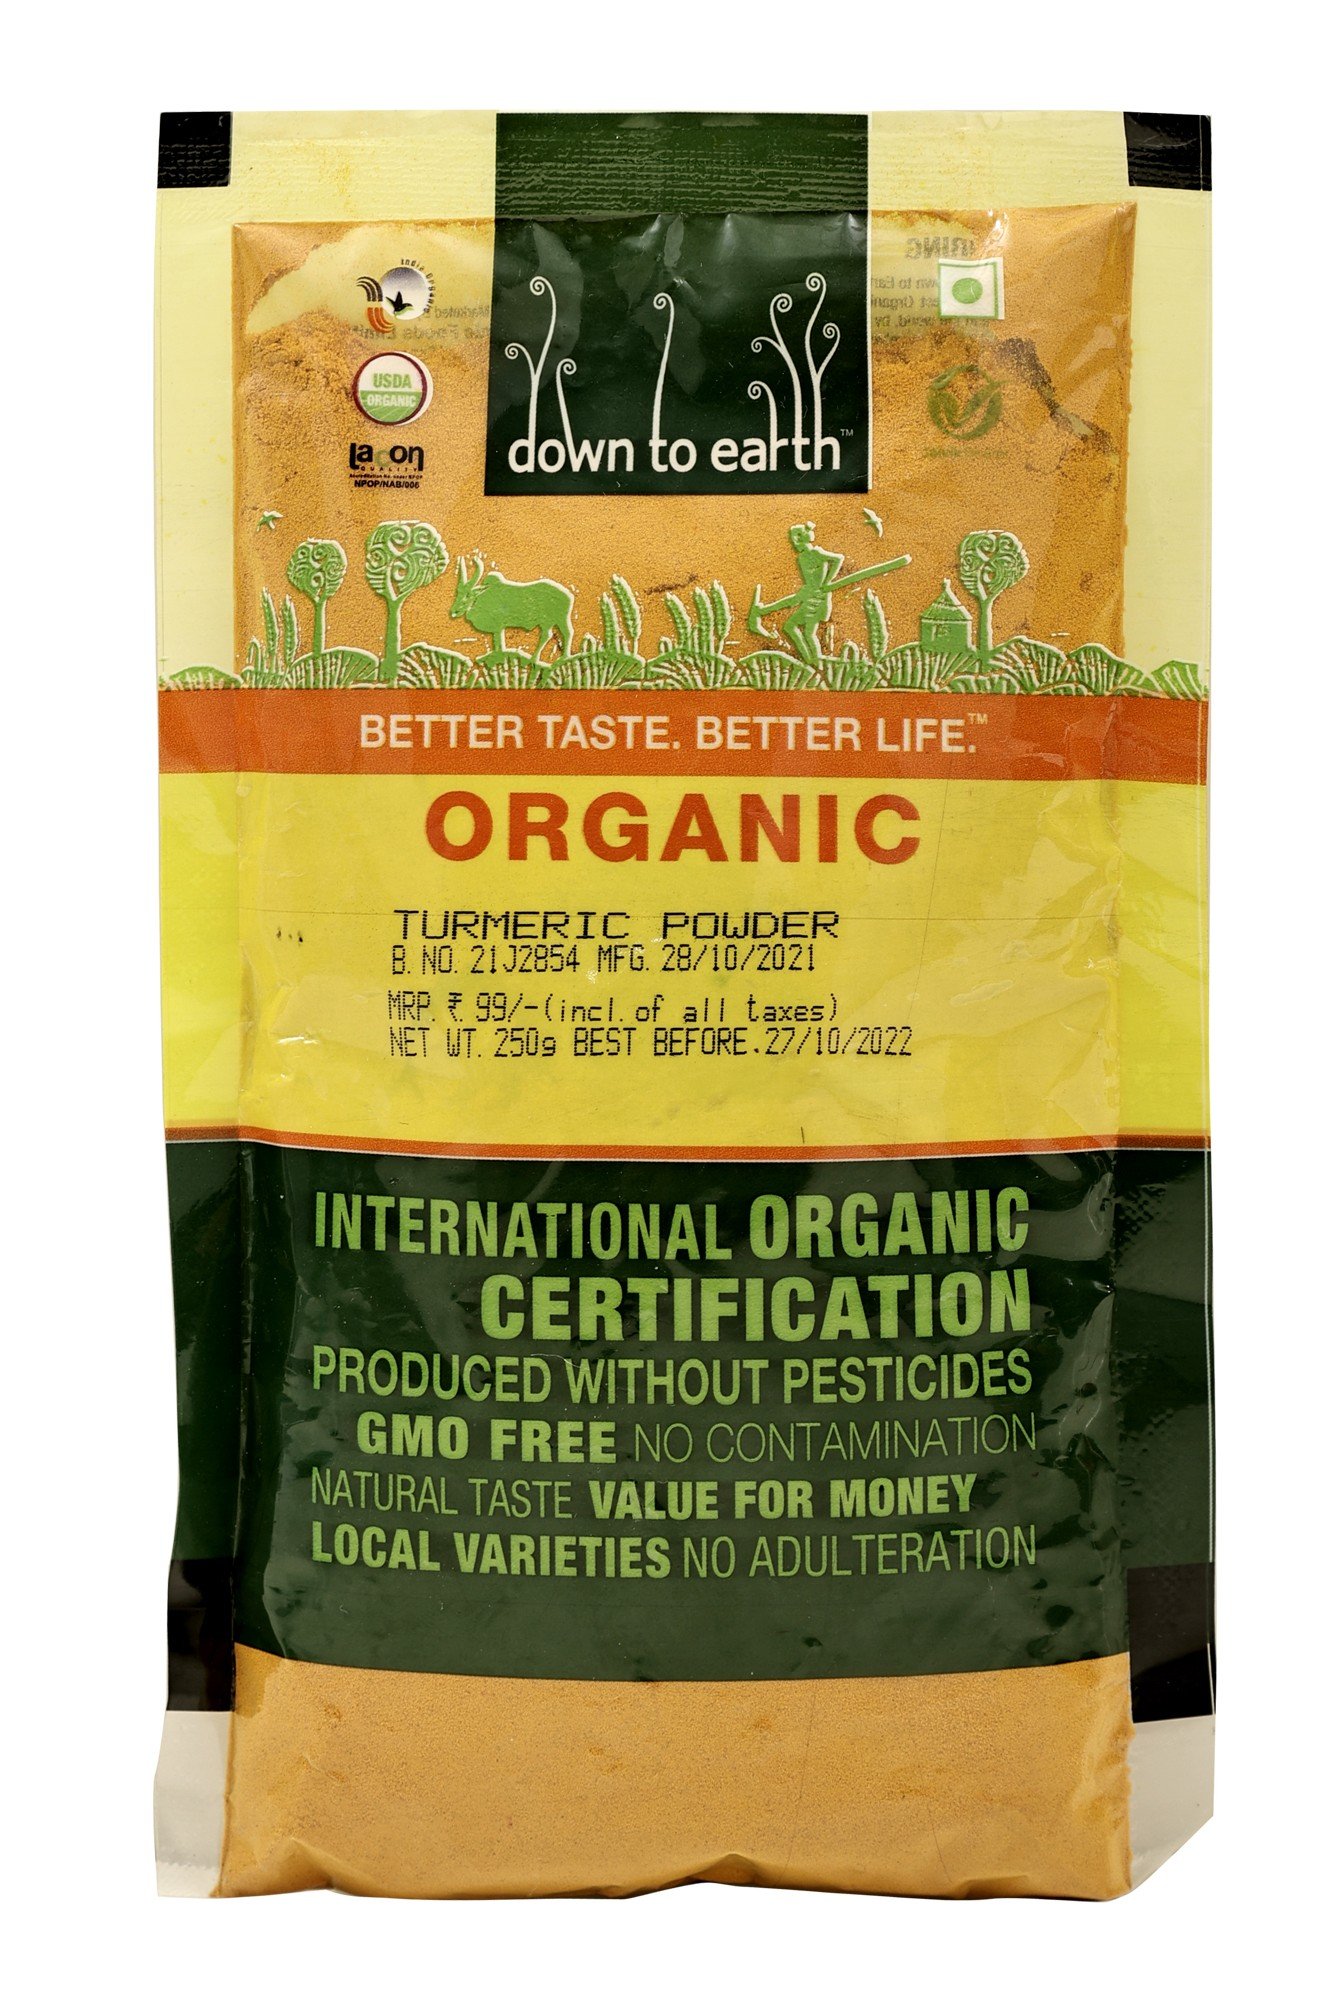 Morarka Organic Down To Earth Turmeric Powder (Improving the Quality of Life, By Improving the Quality of Food.) - book cover